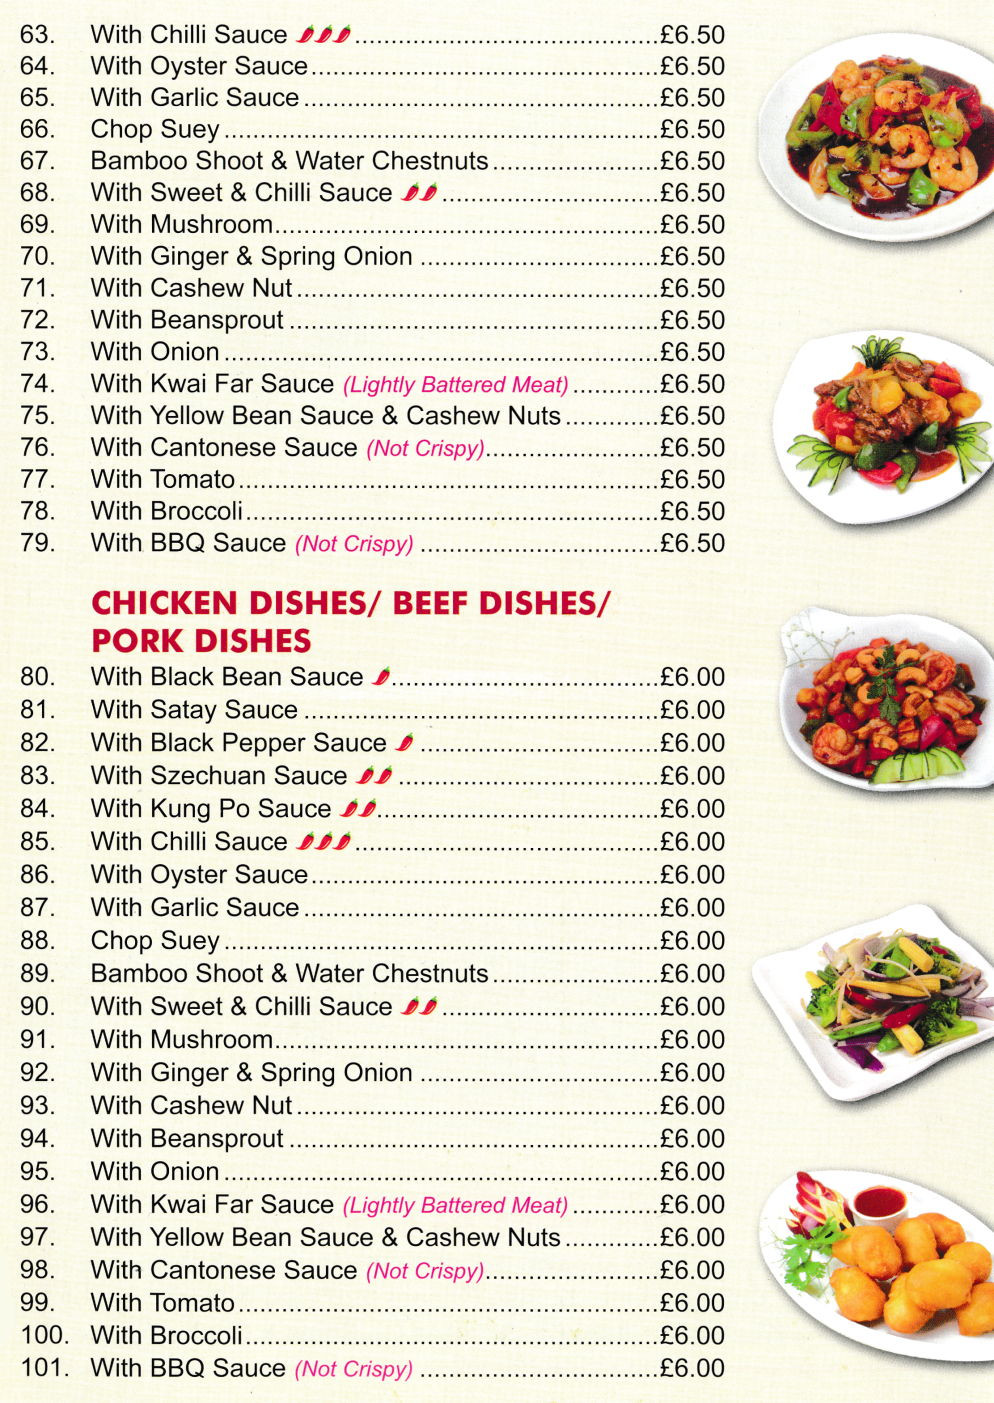 Menu for G&N's Kitchen - King Prawn Chop Suey, Chicken with Szechuan Sauce, Beef with Kung Po Sauce, Pork with Cantonese Sauce..